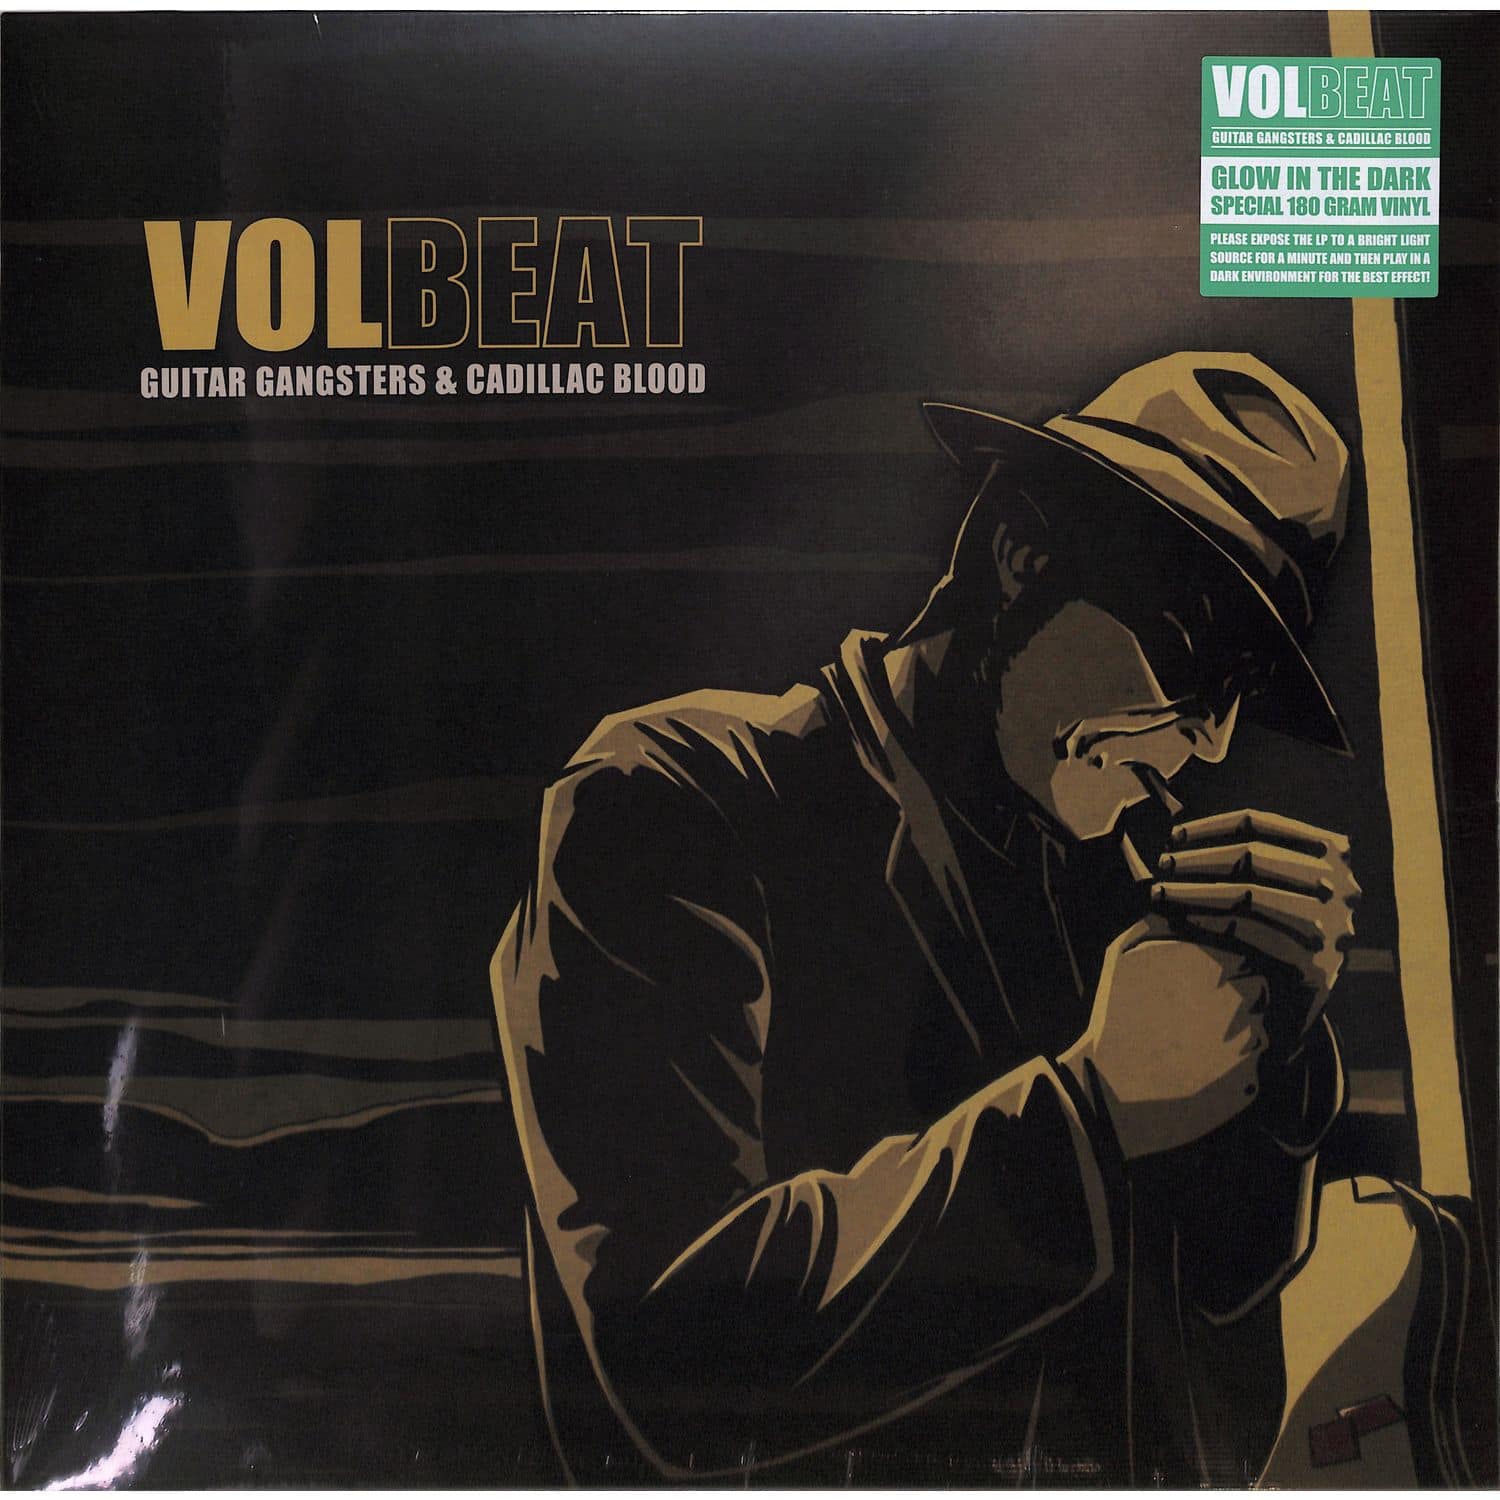 Volbeat - GUITAR GANGSTERS & CADILLAC BLOOD 